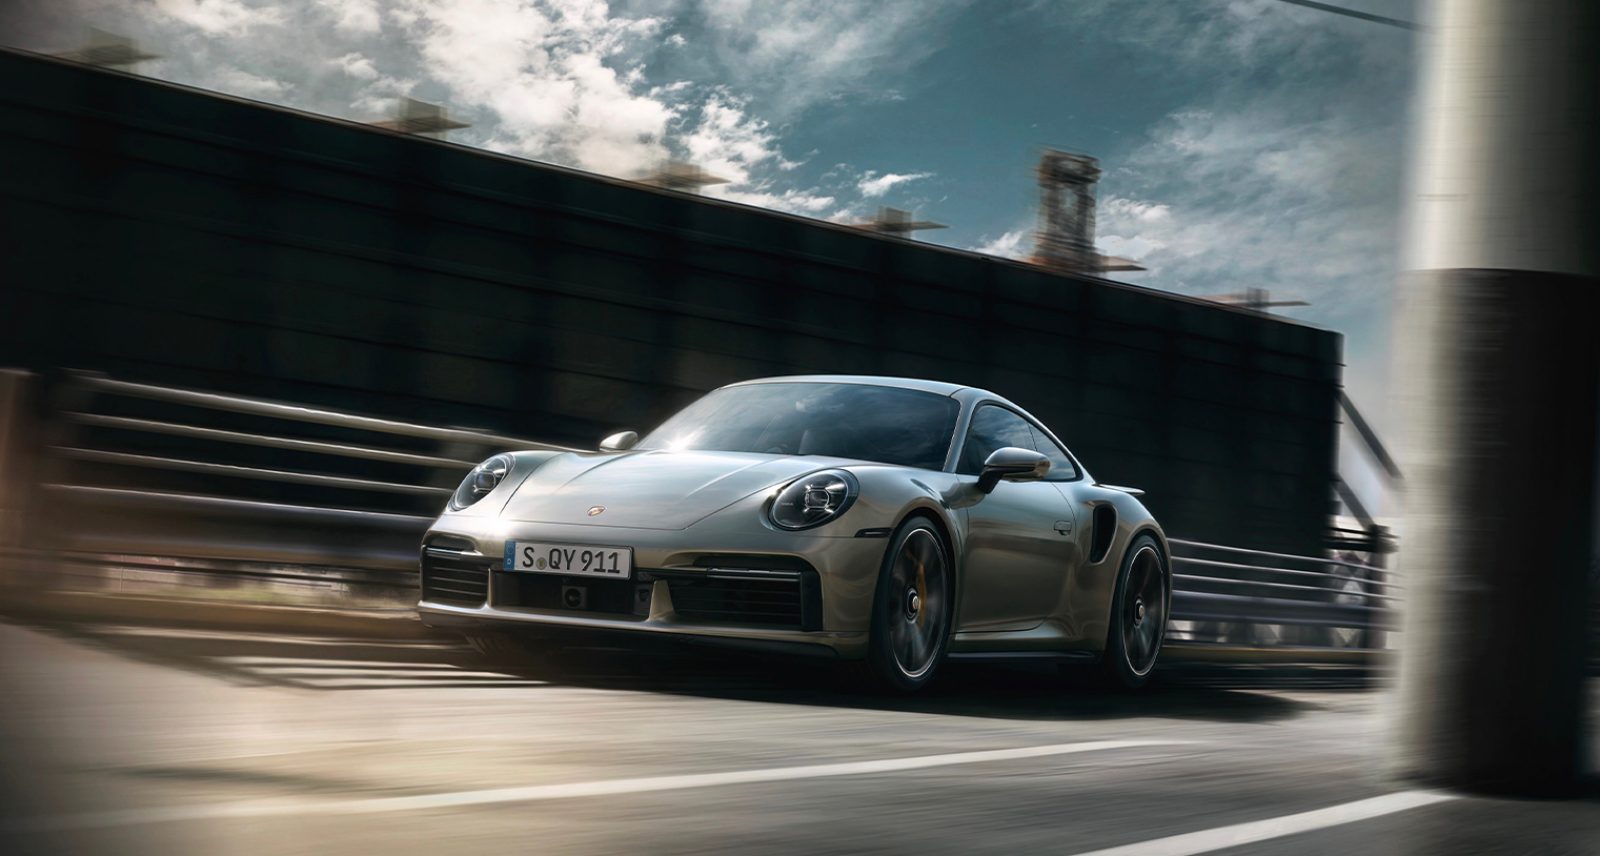 Porsche Just Revealed the Most Powerful 911 Turbo Yet